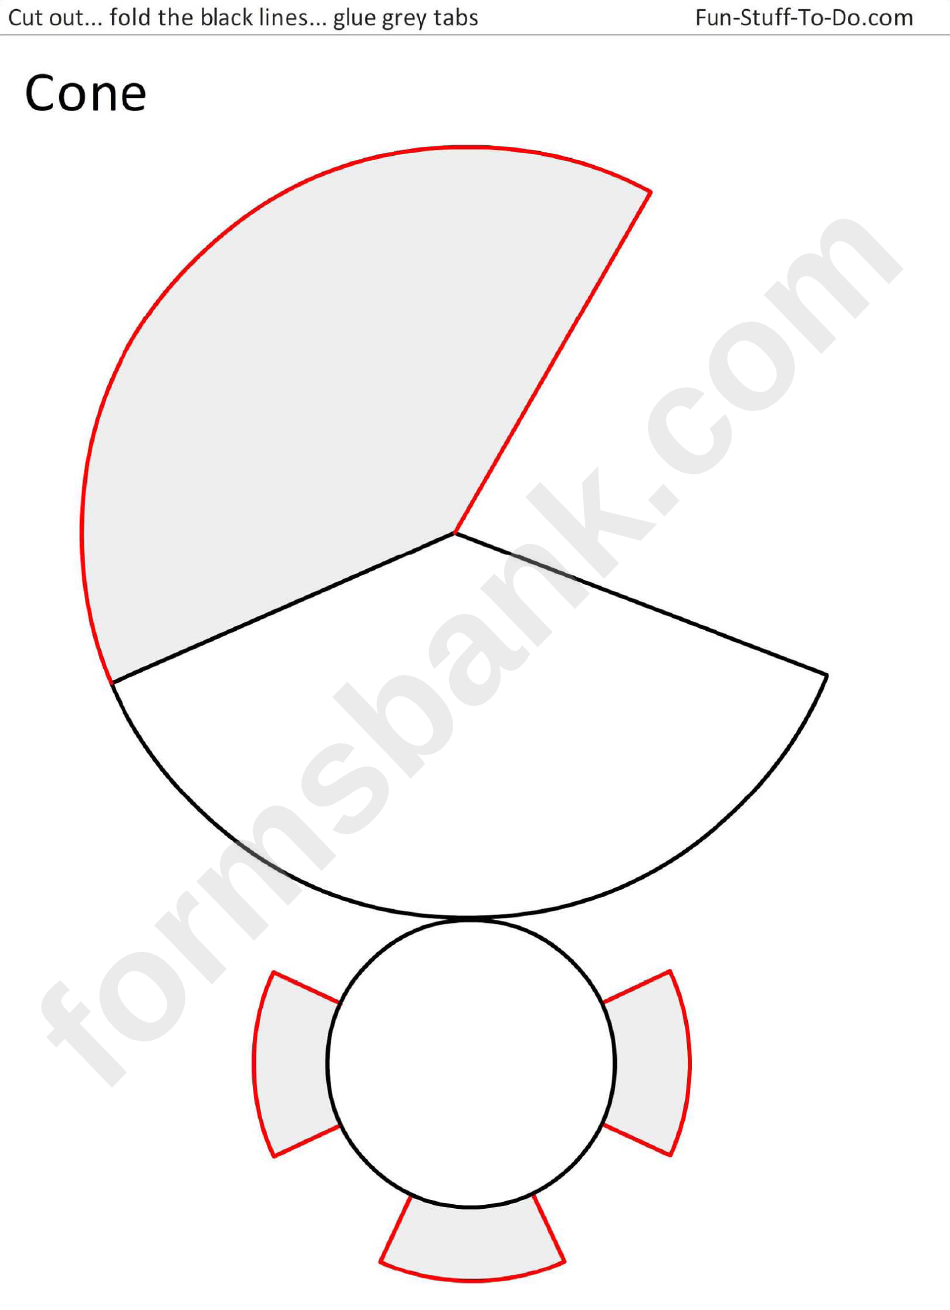 Cone Shape Template printable pdf download